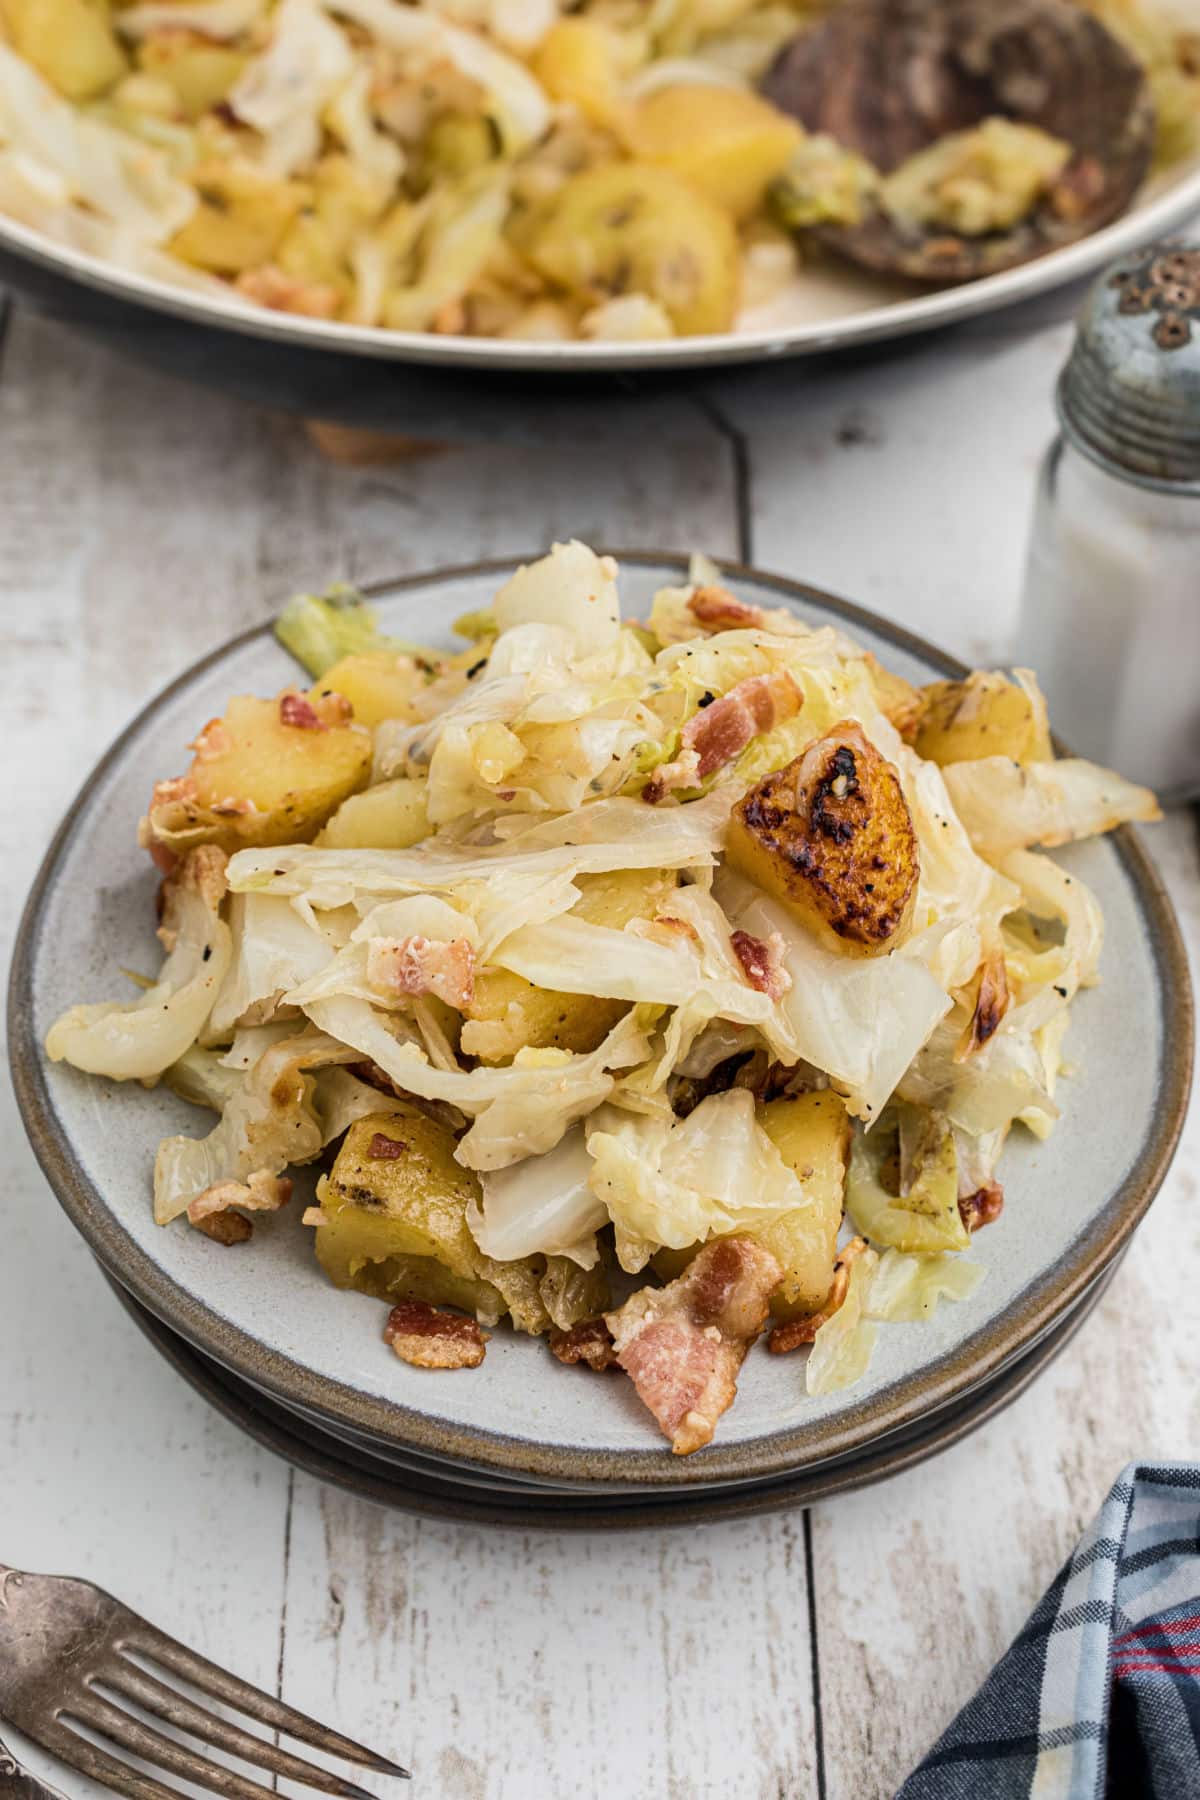 Fried cabbage and potatoes on a dished up plate.